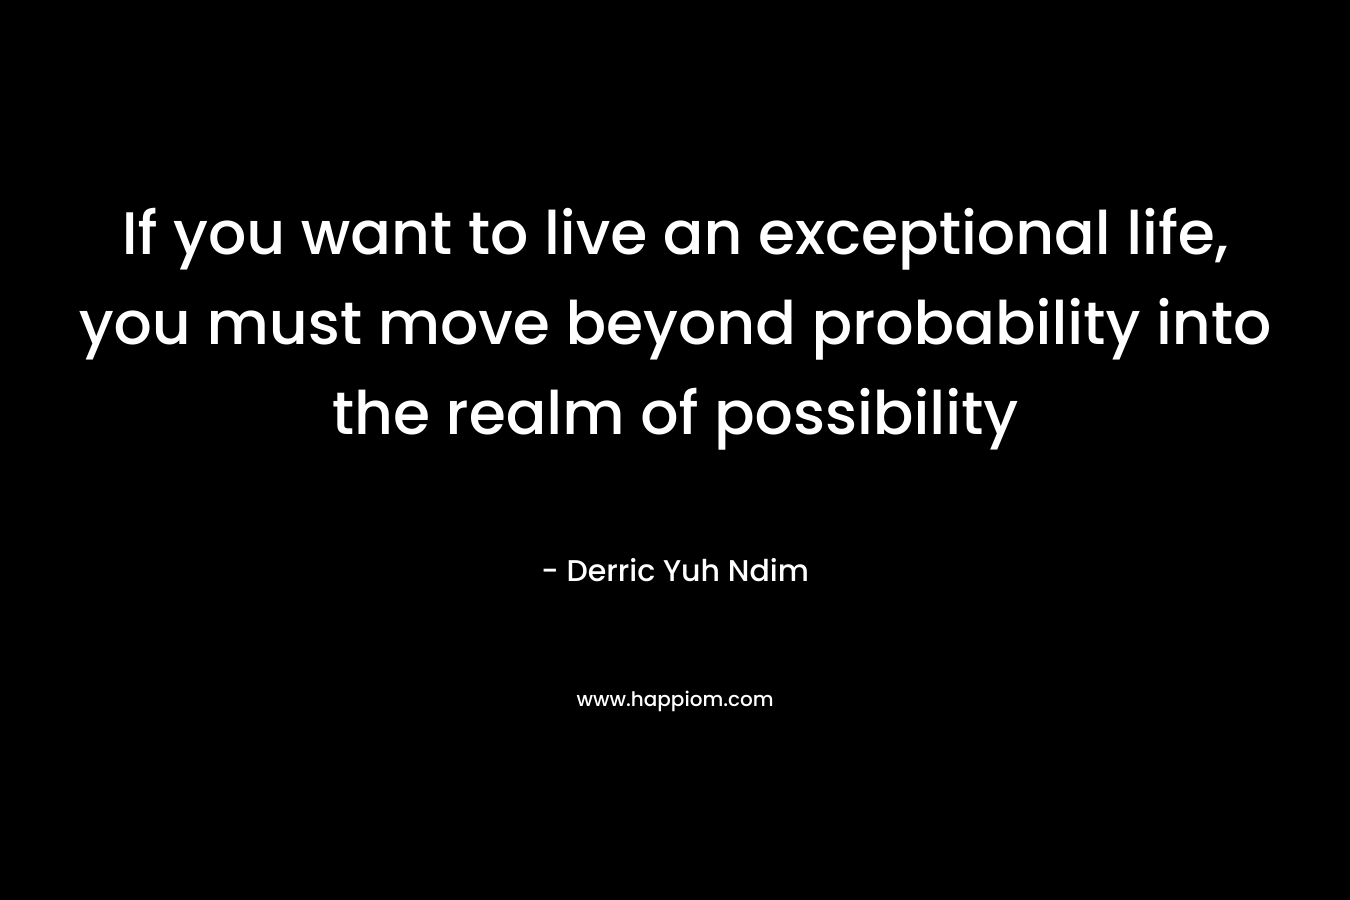 If you want to live an exceptional life, you must move beyond probability into the realm of possibility – Derric Yuh Ndim